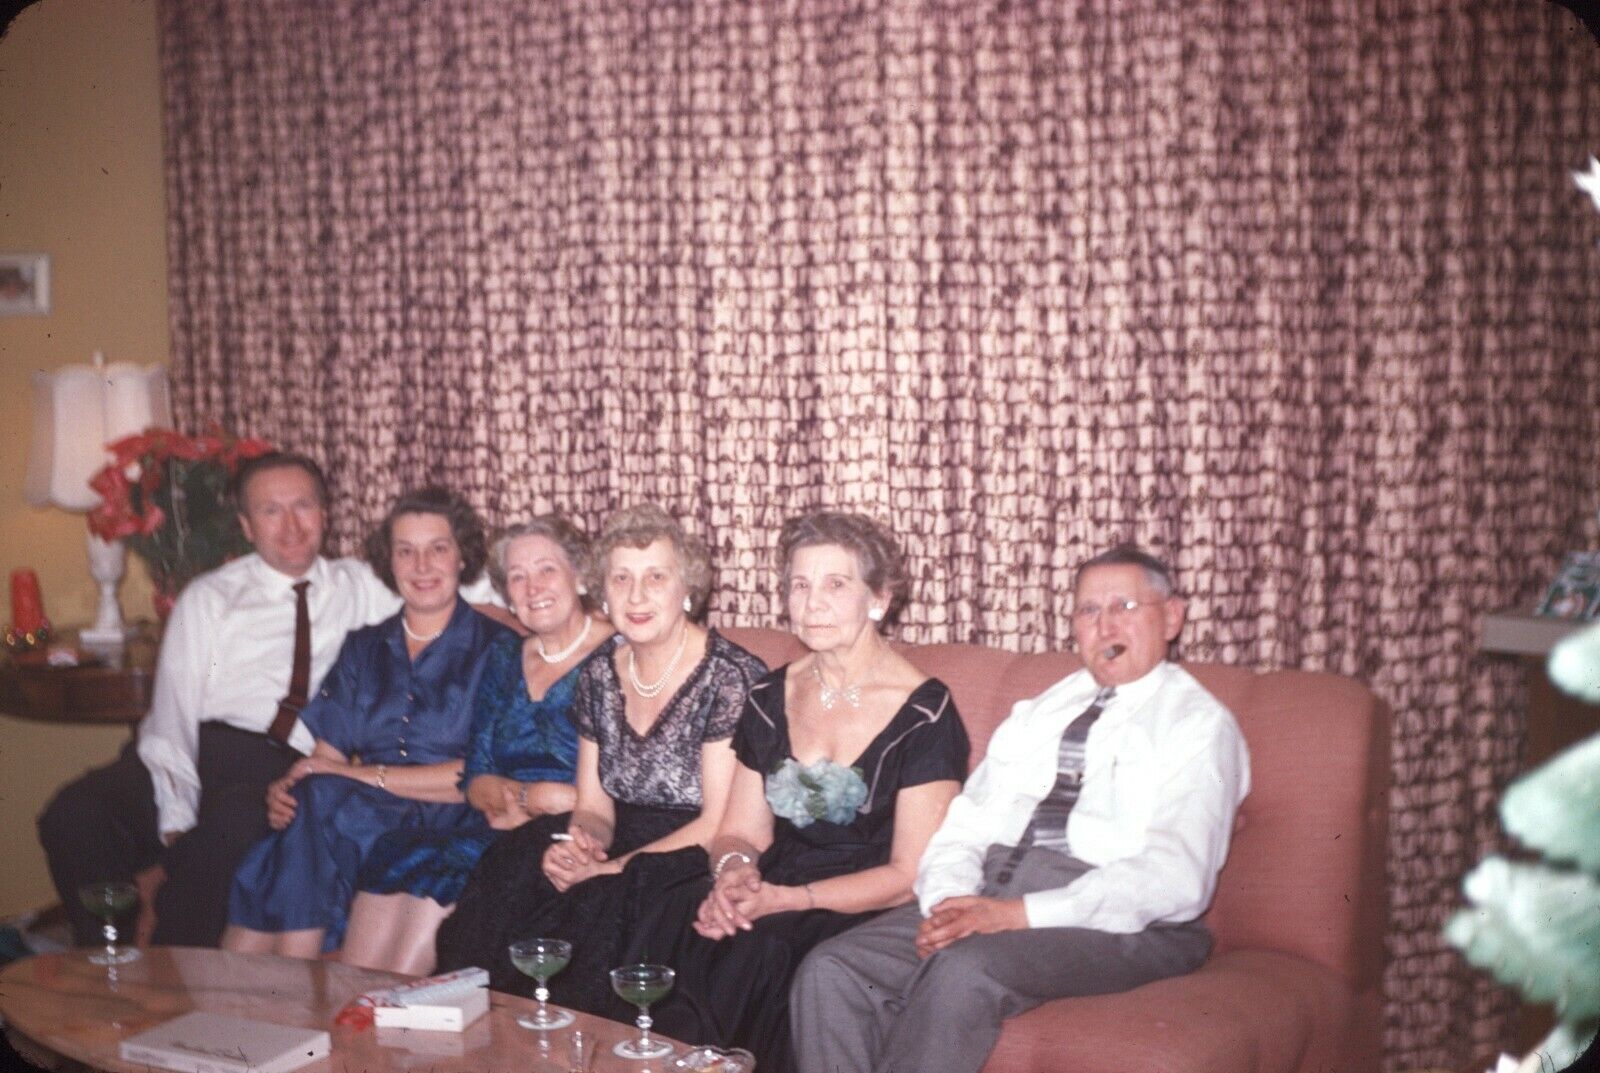 1958 Older Men Women in Suits Dresses Smoking on Couch Party Vintage 35mm Slide